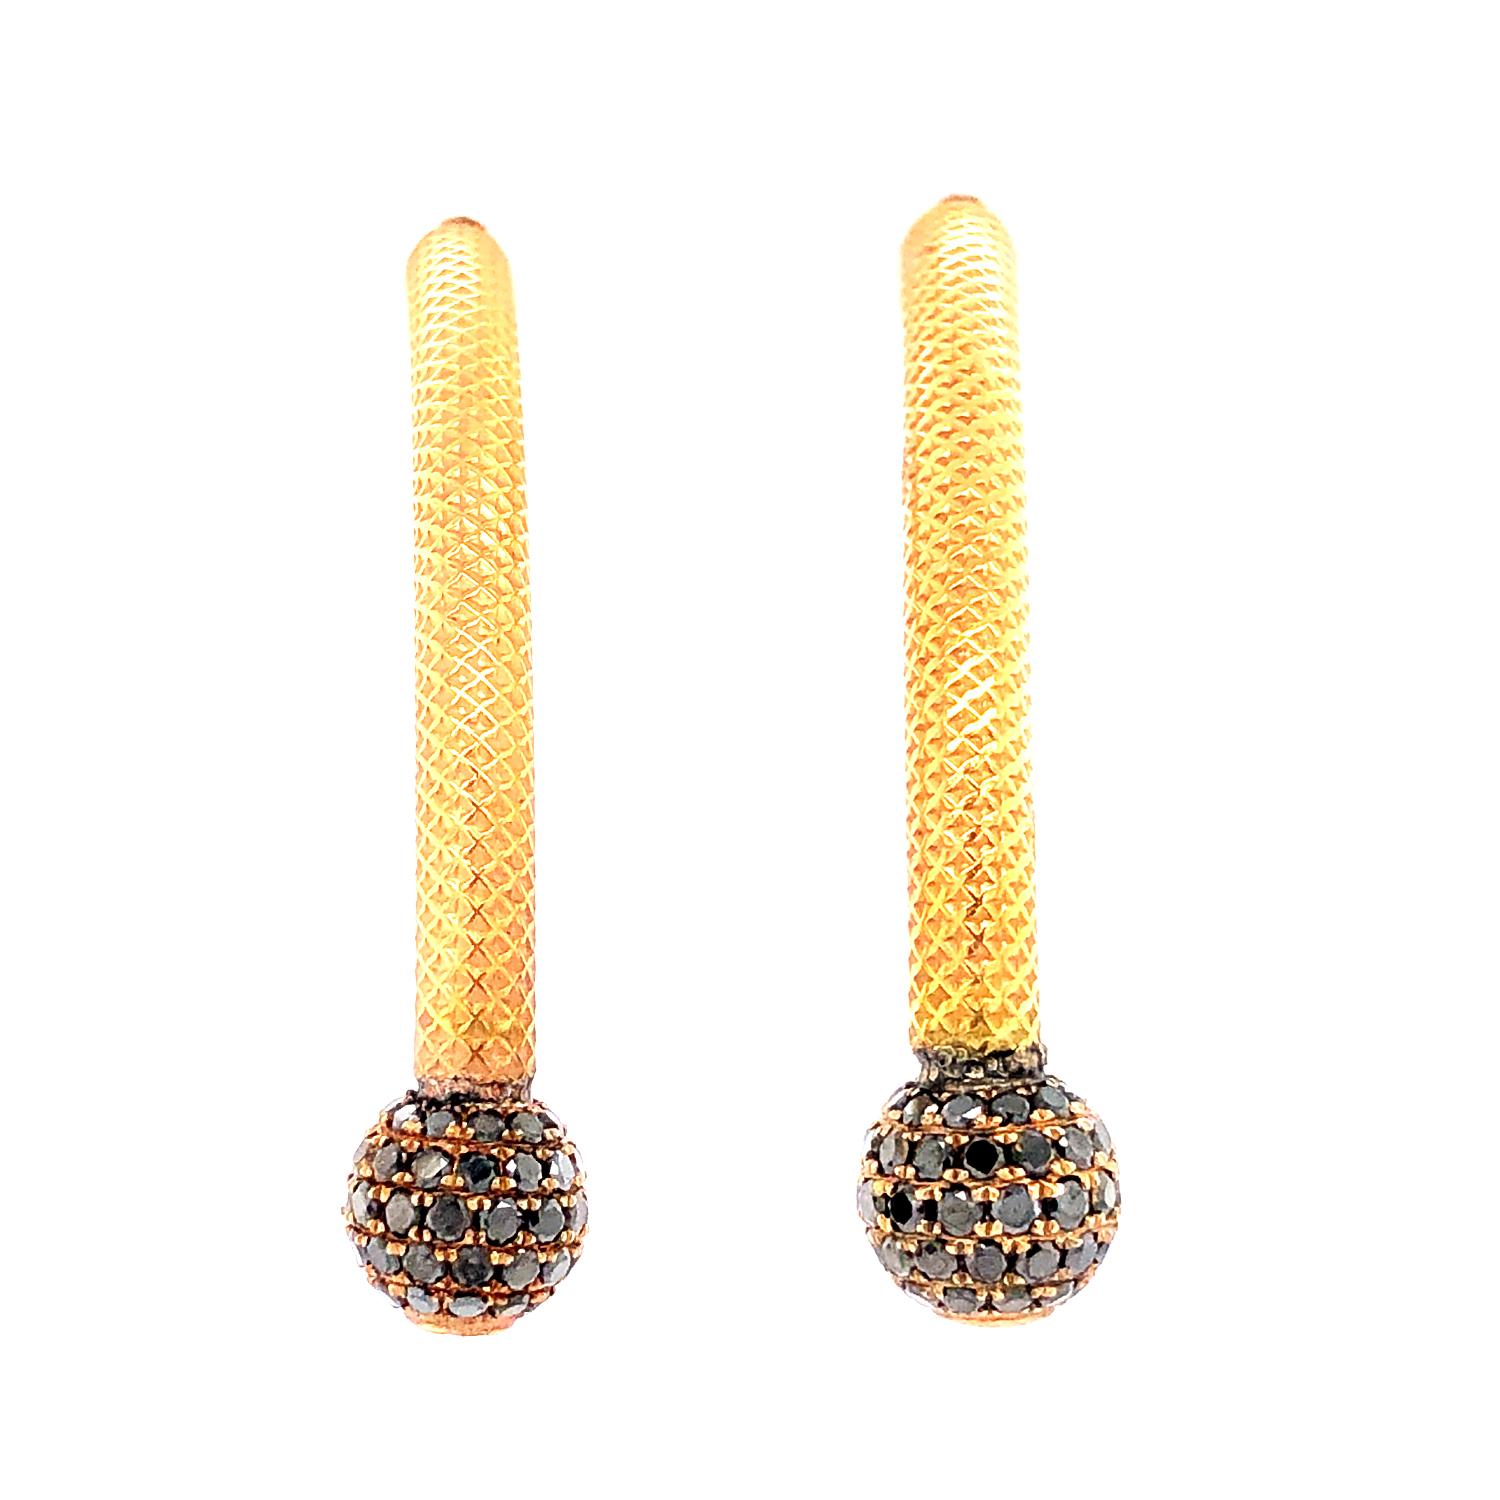 Mixed Cut Pave Diamond Ball Earrings Made In 18k Rose Gold & Silver For Sale